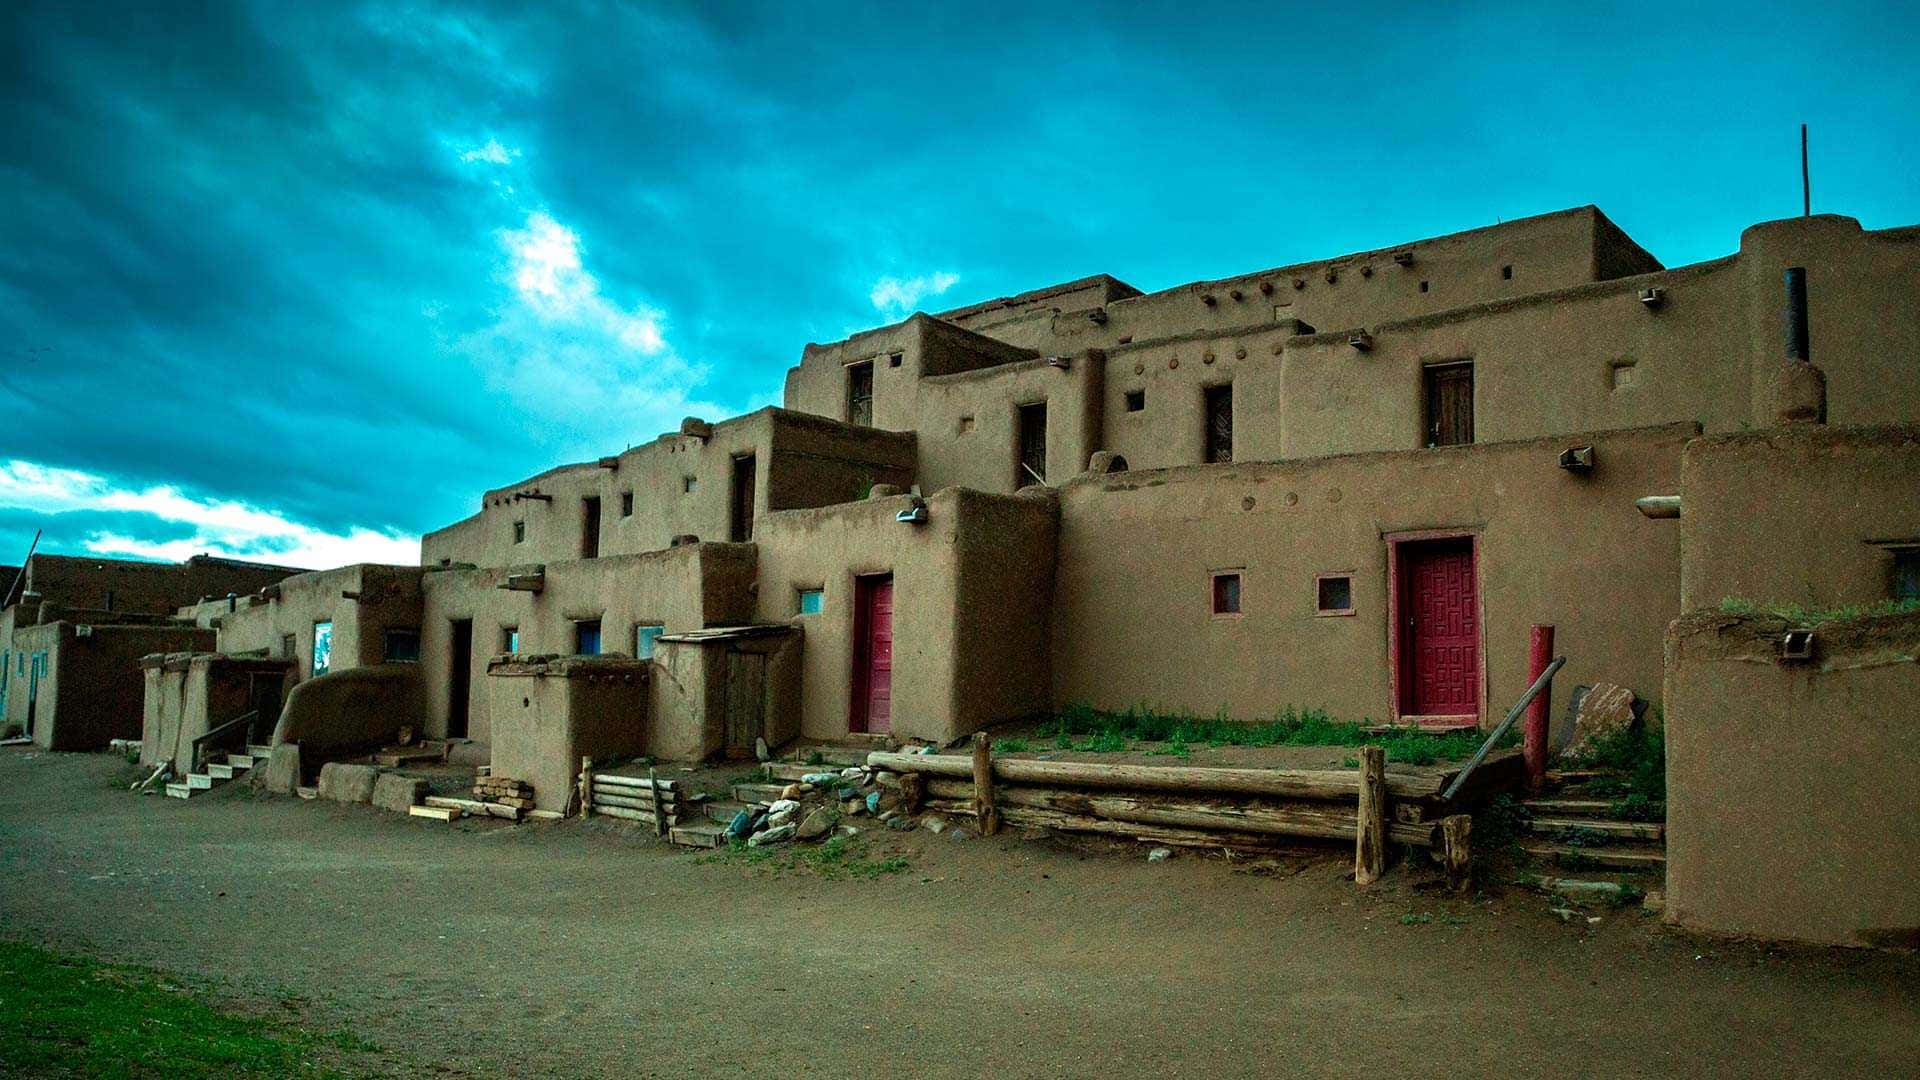 Gloomy Day in Taos Pueblo, New Mexico Wallpaper